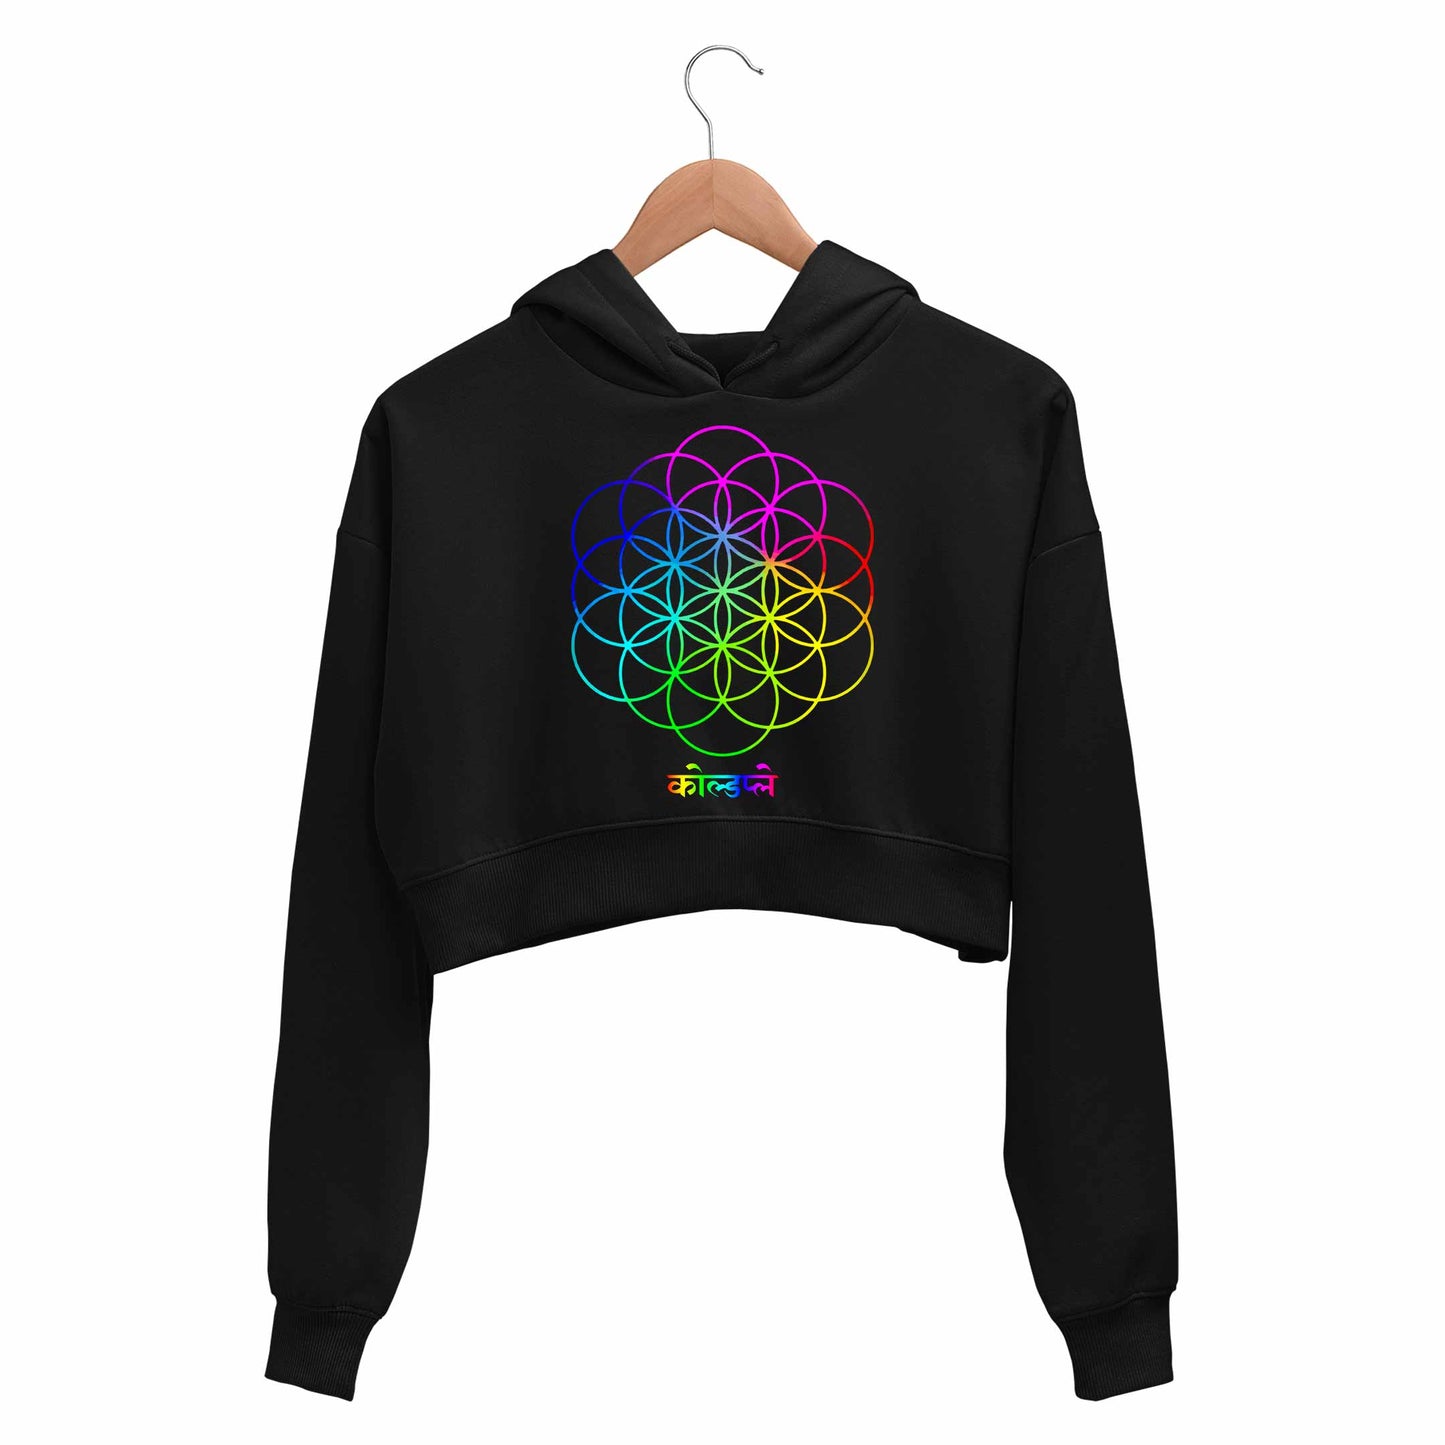 Coldplay Crop Hoodie - On Sale - XS (Chest size 32 IN)